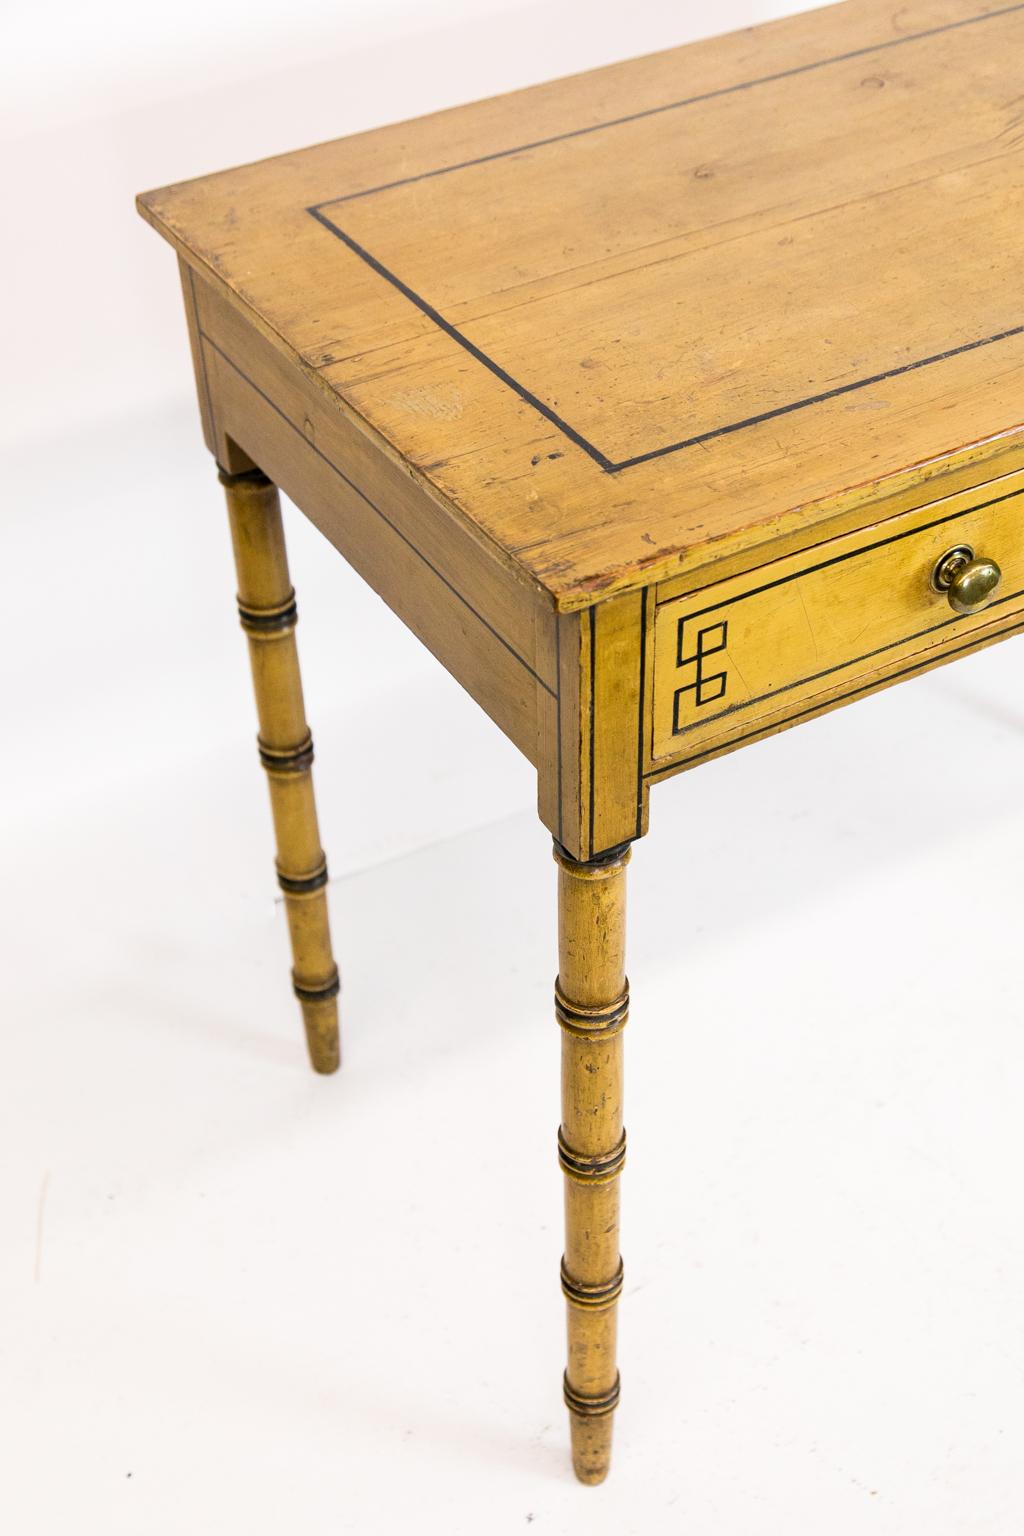 Faux Bois English Faux Bamboo Painted Table